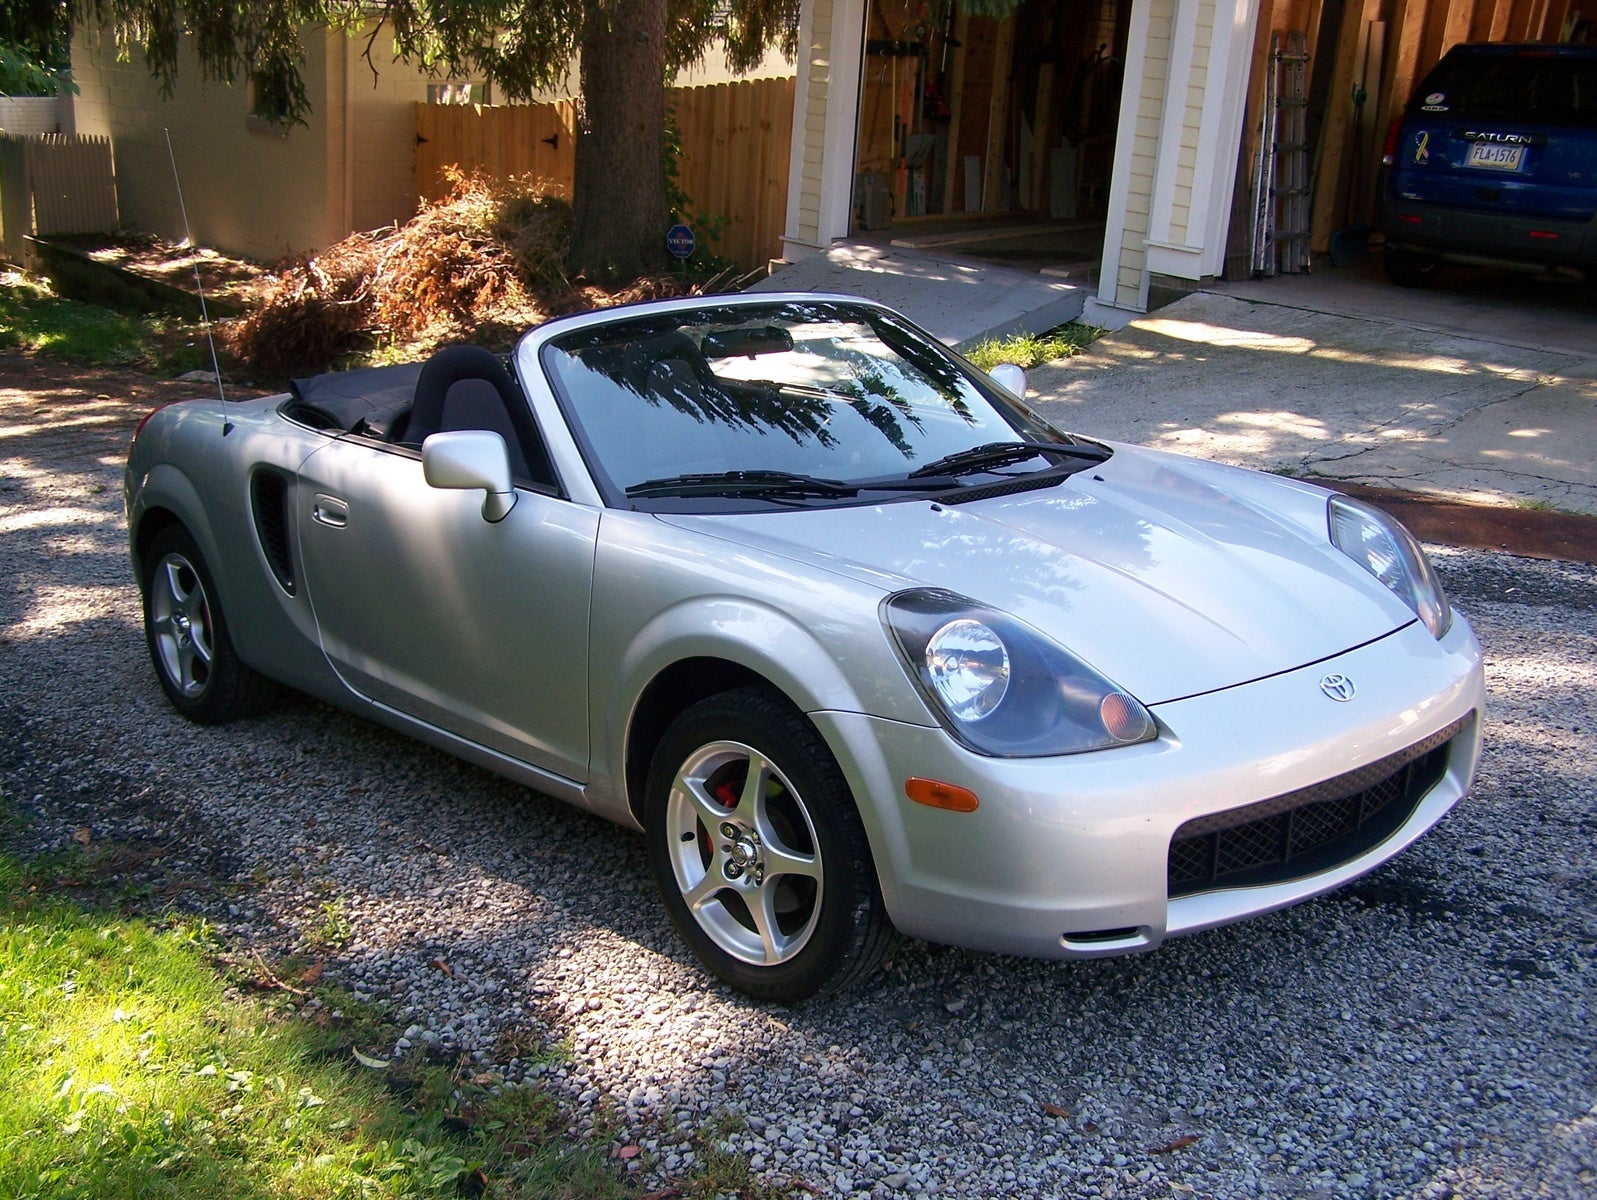 2001 Toyota Mr2 Spyder Convertible, 1597x1200 in 909.3KB. 